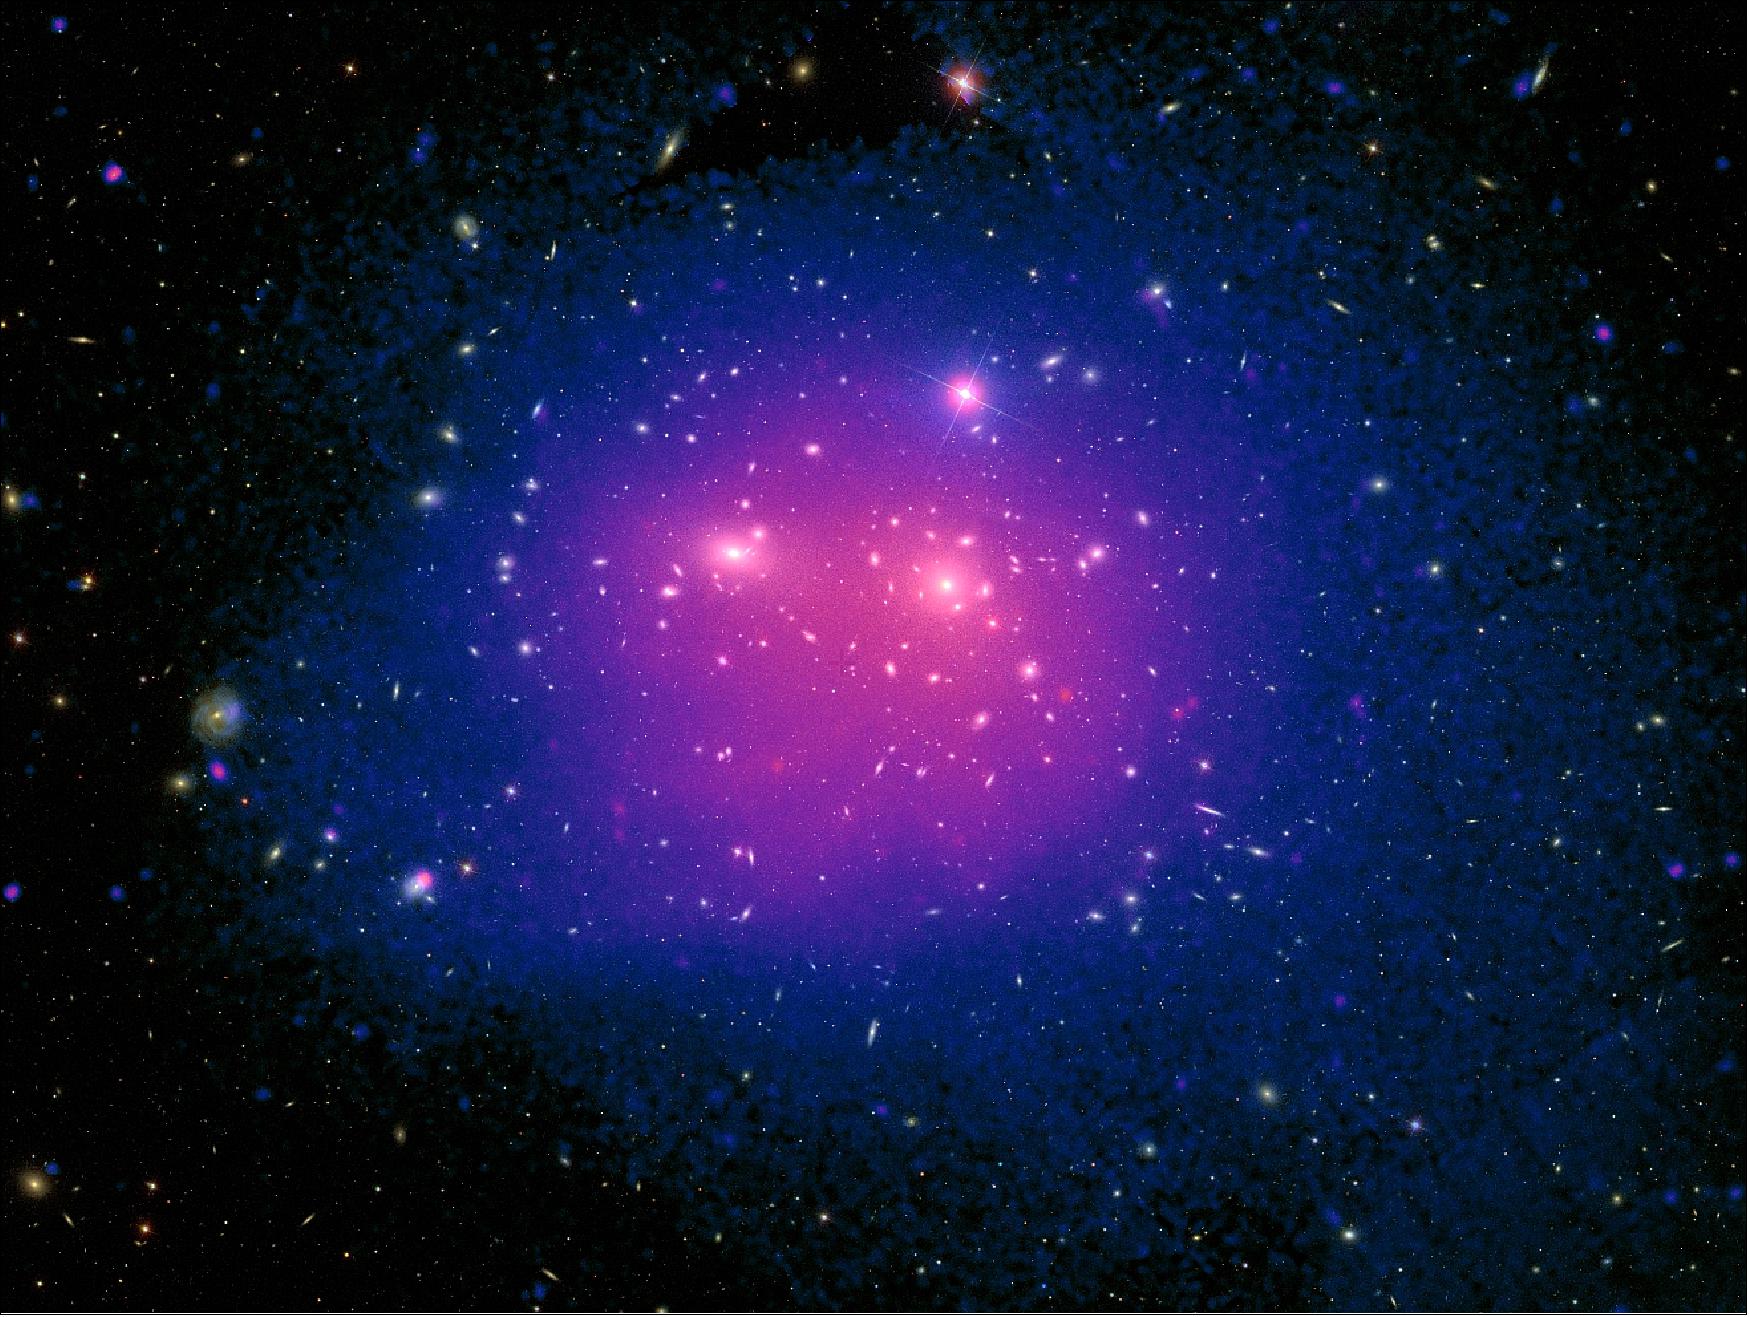 Figure 50: This image shows the bright, nearby, and massive Coma galaxy cluster in X-ray and optical light, as seen by XMM-Newton’s EPIC and the SDSS (Sloan Digital Sky Survey), image credit: ESA/XMM-Newton/SDSS/J. Sanders et al. 2019